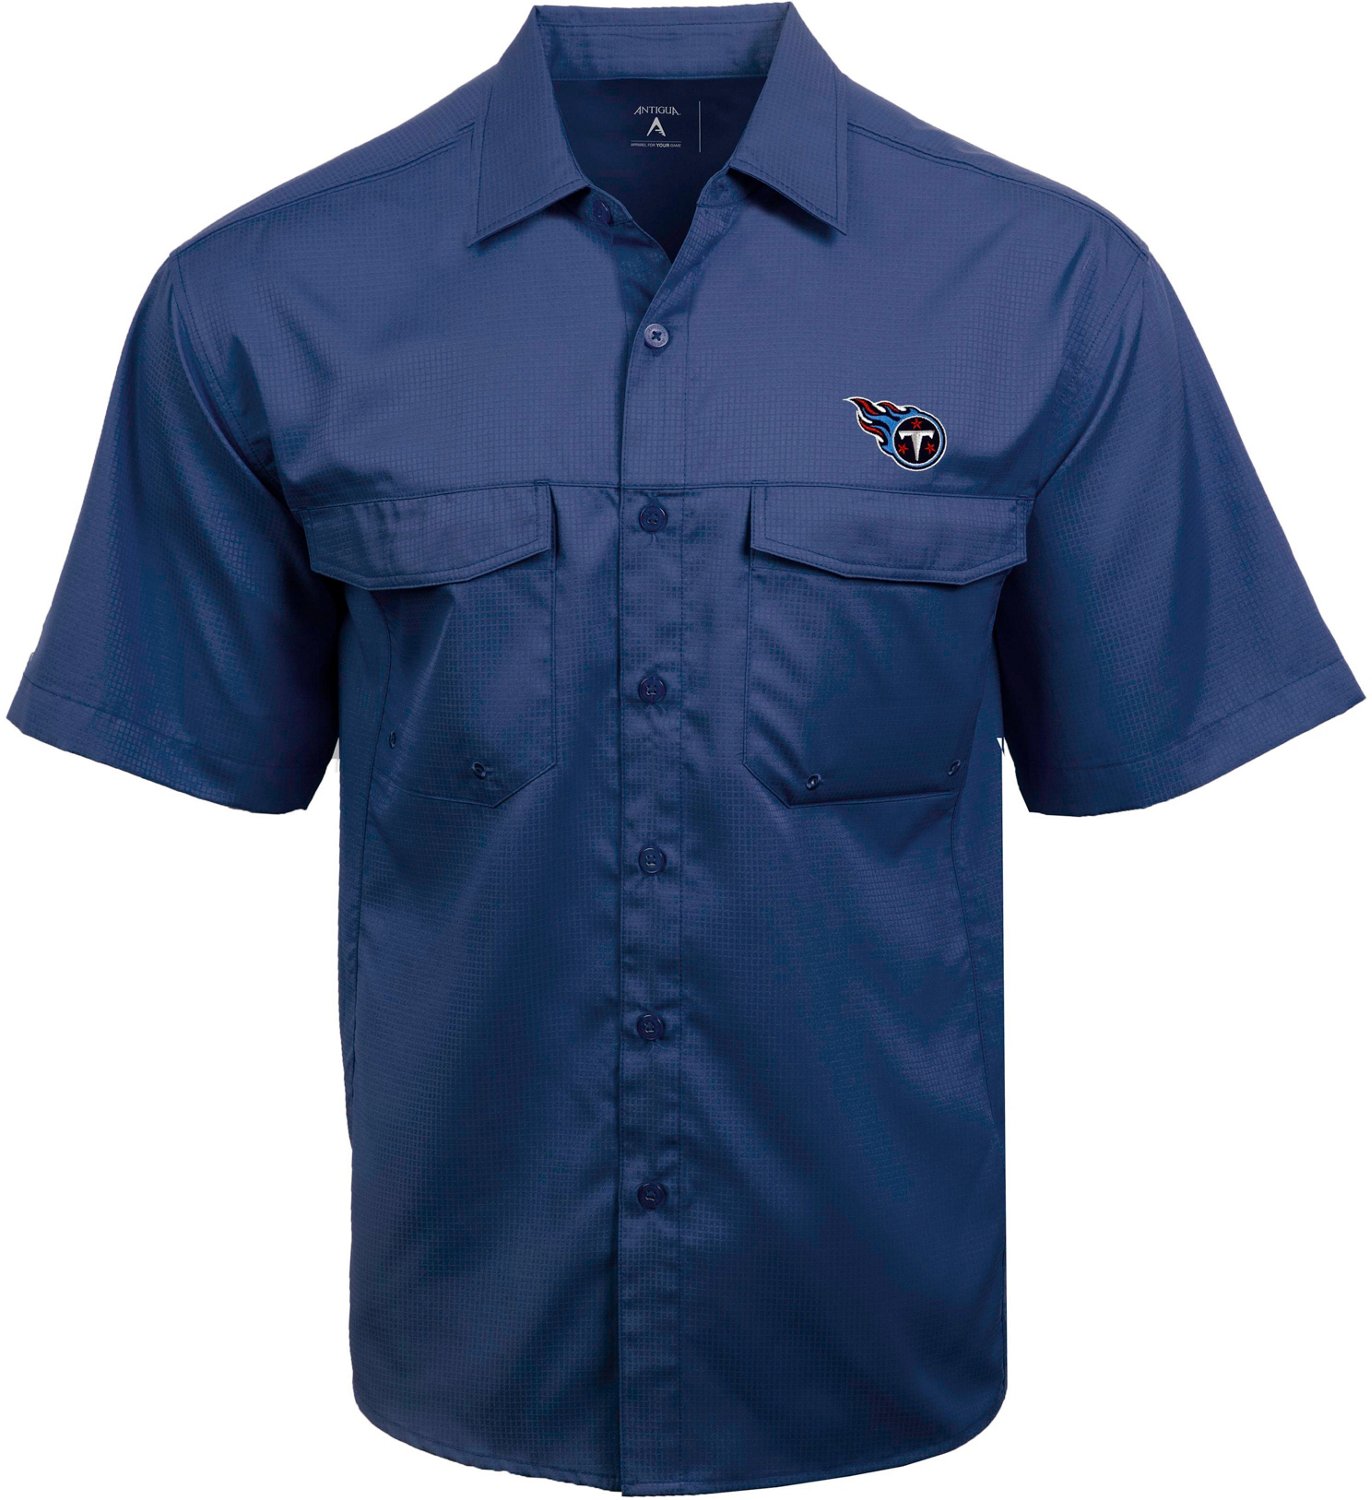 Antigua Men's Tennessee Titans Game Day Woven Fishing Shirt